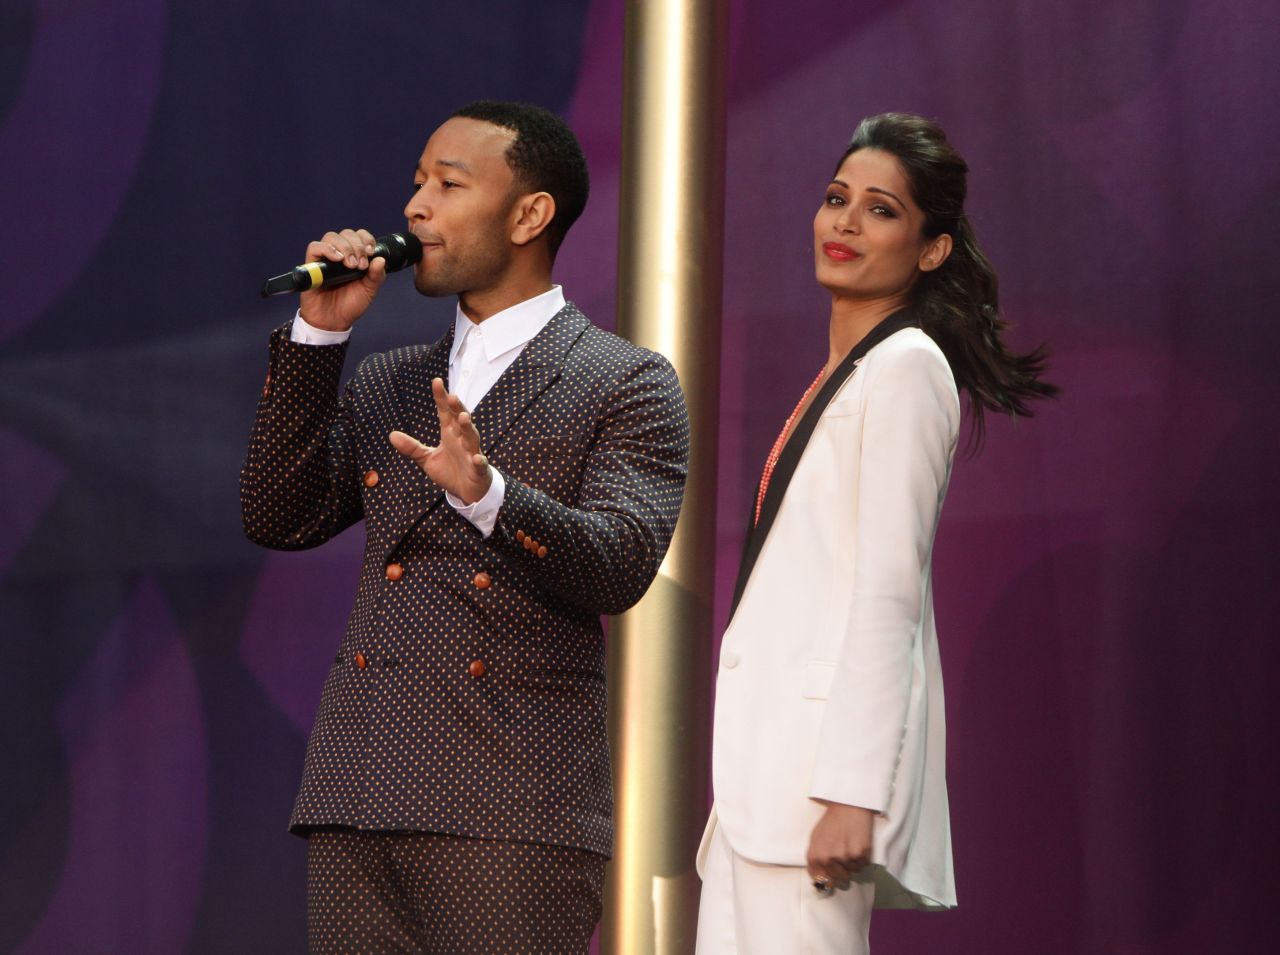 John Legend with Freida Pinto during the event. Pinto said she was grateful for the life she's been able to lead and wants to help other women and girls lead a better life.